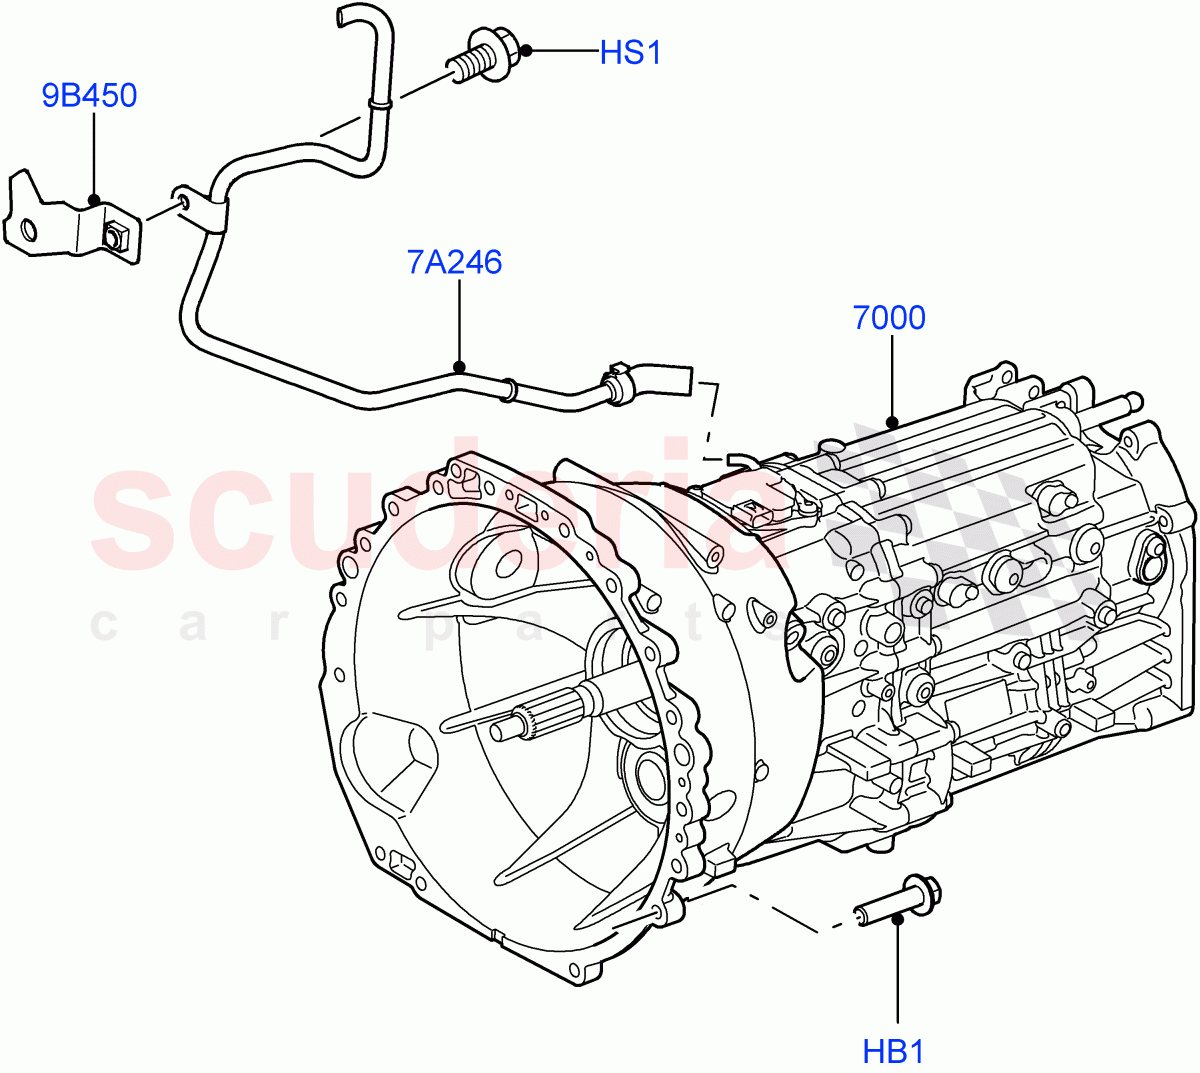 Manual Transaxle And Case(6 Speed Man ZF S6-53)((V)FROMAA000001,(V)TOBA999999) of Land Rover Land Rover Discovery 4 (2010-2016) [3.0 Diesel 24V DOHC TC]